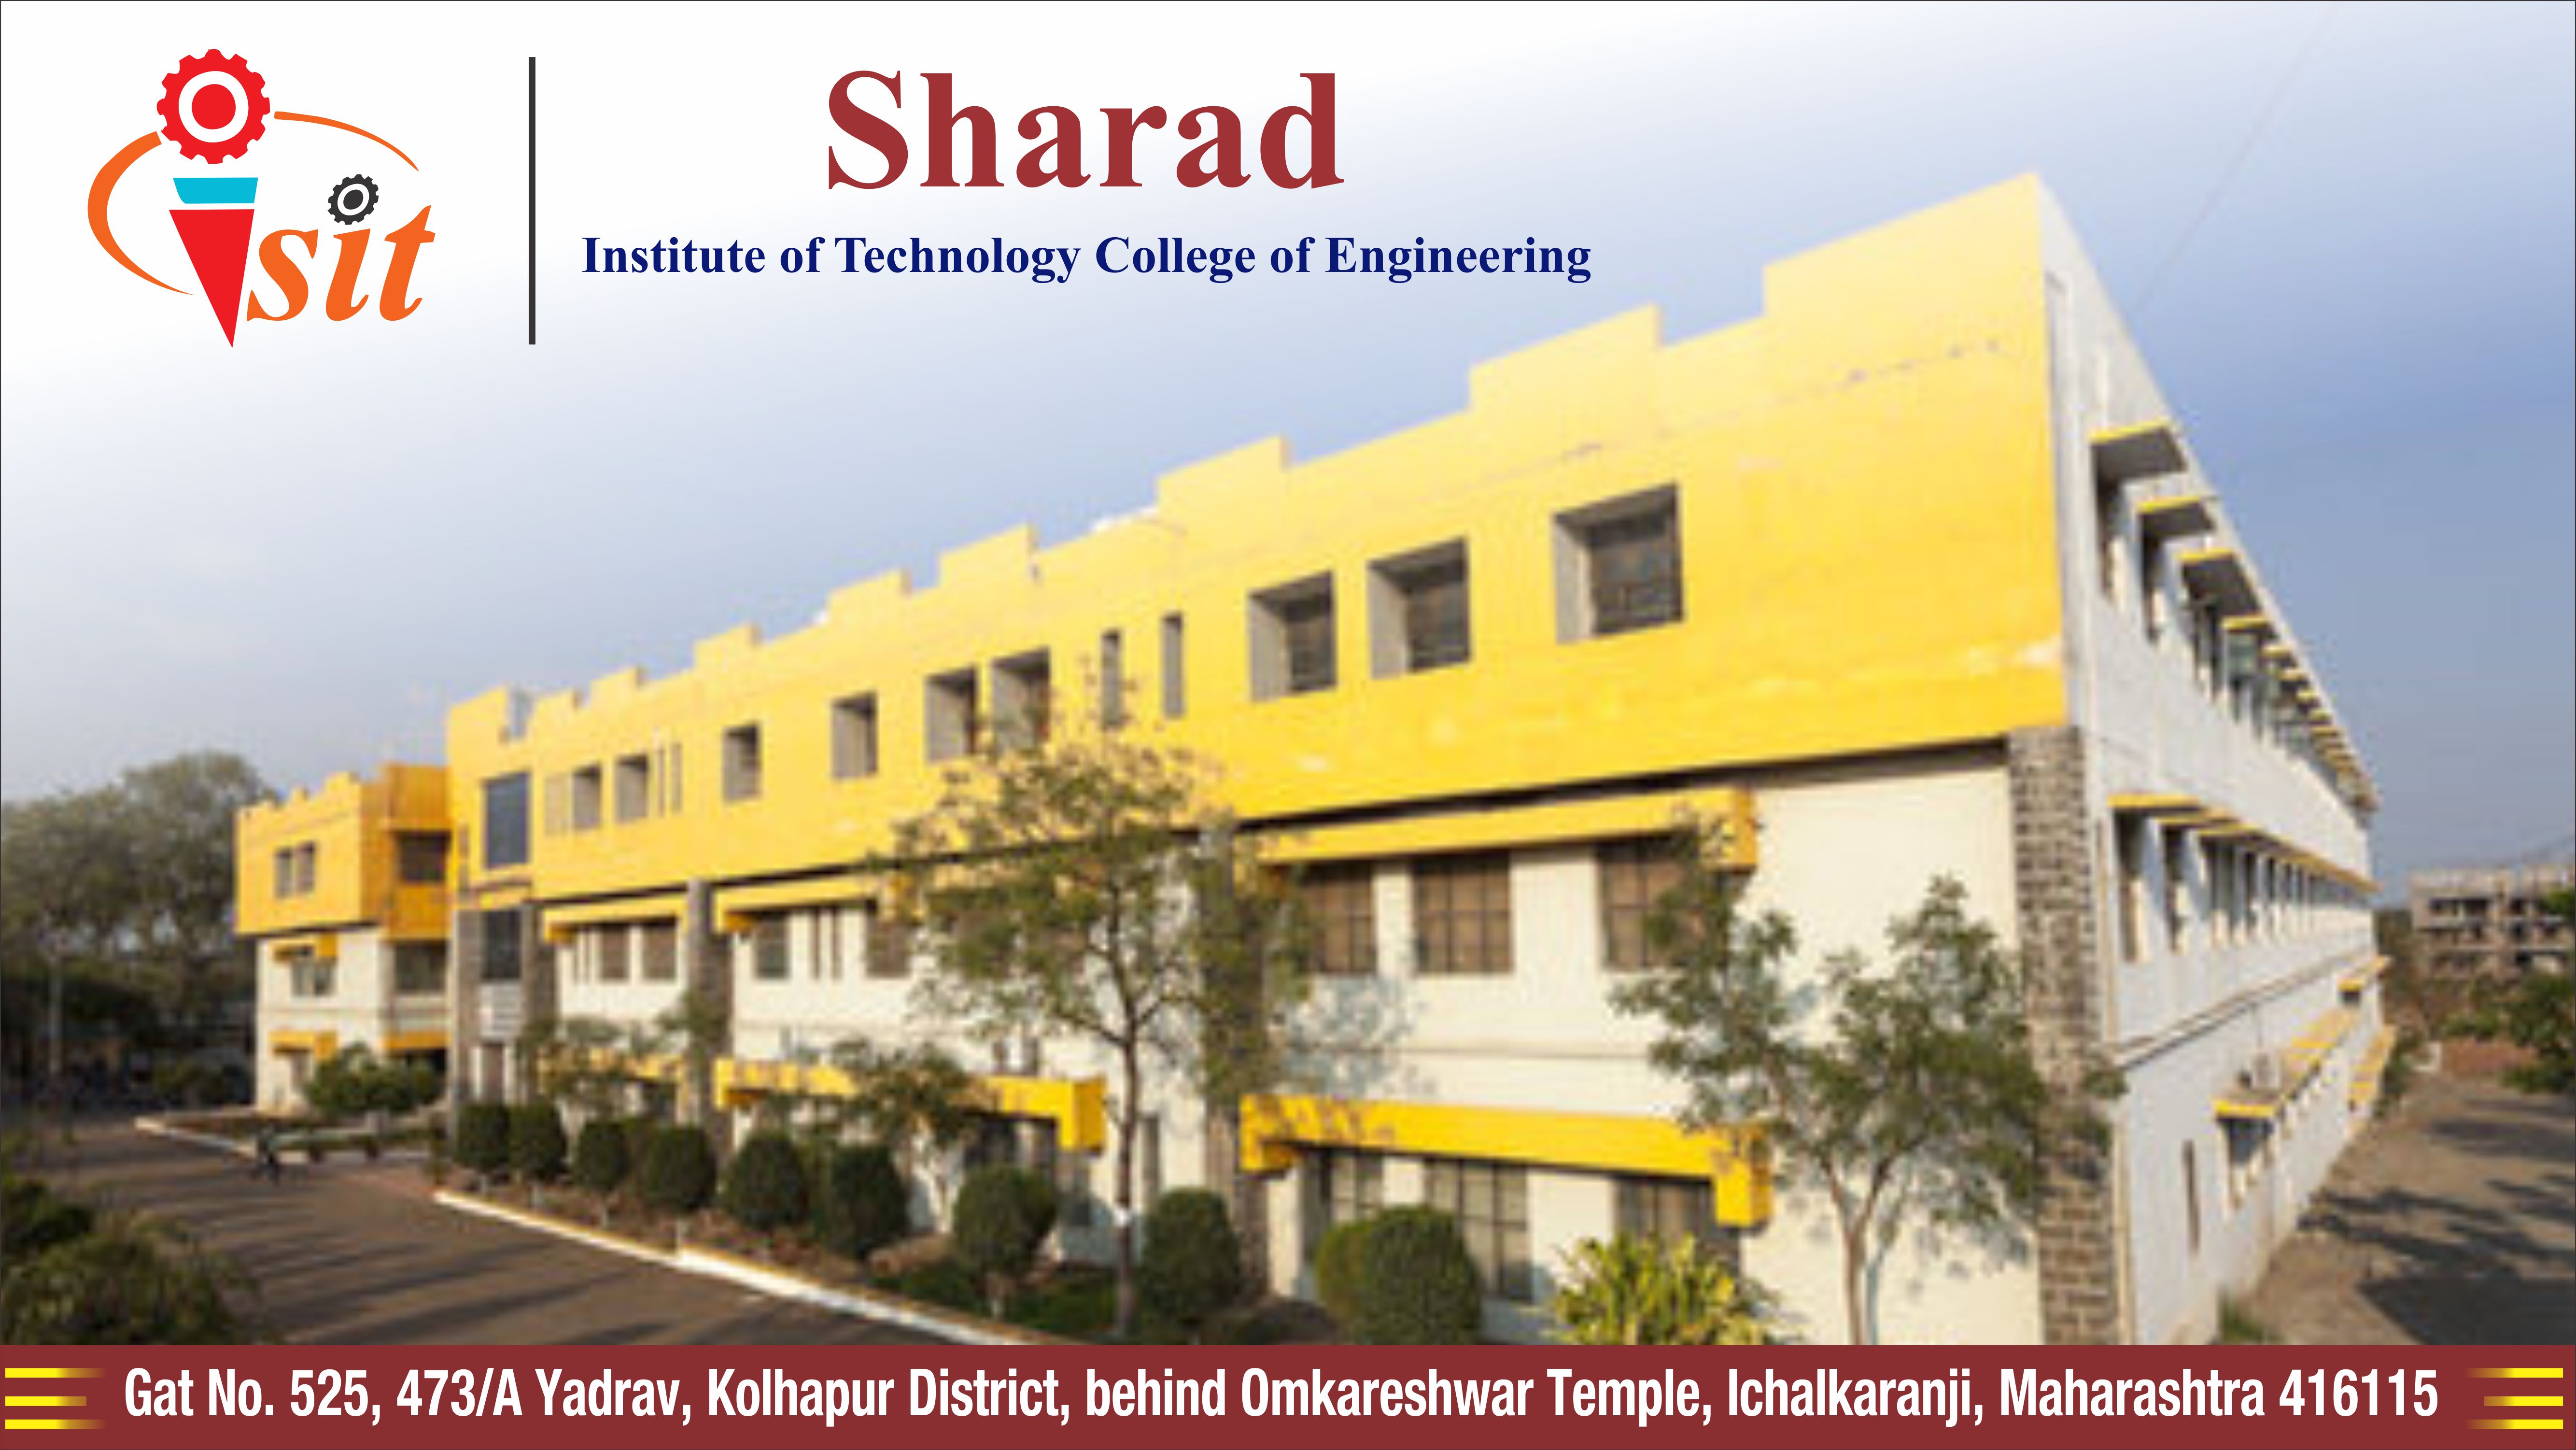 out side view of Sharad Institute of Technology College of Engineering